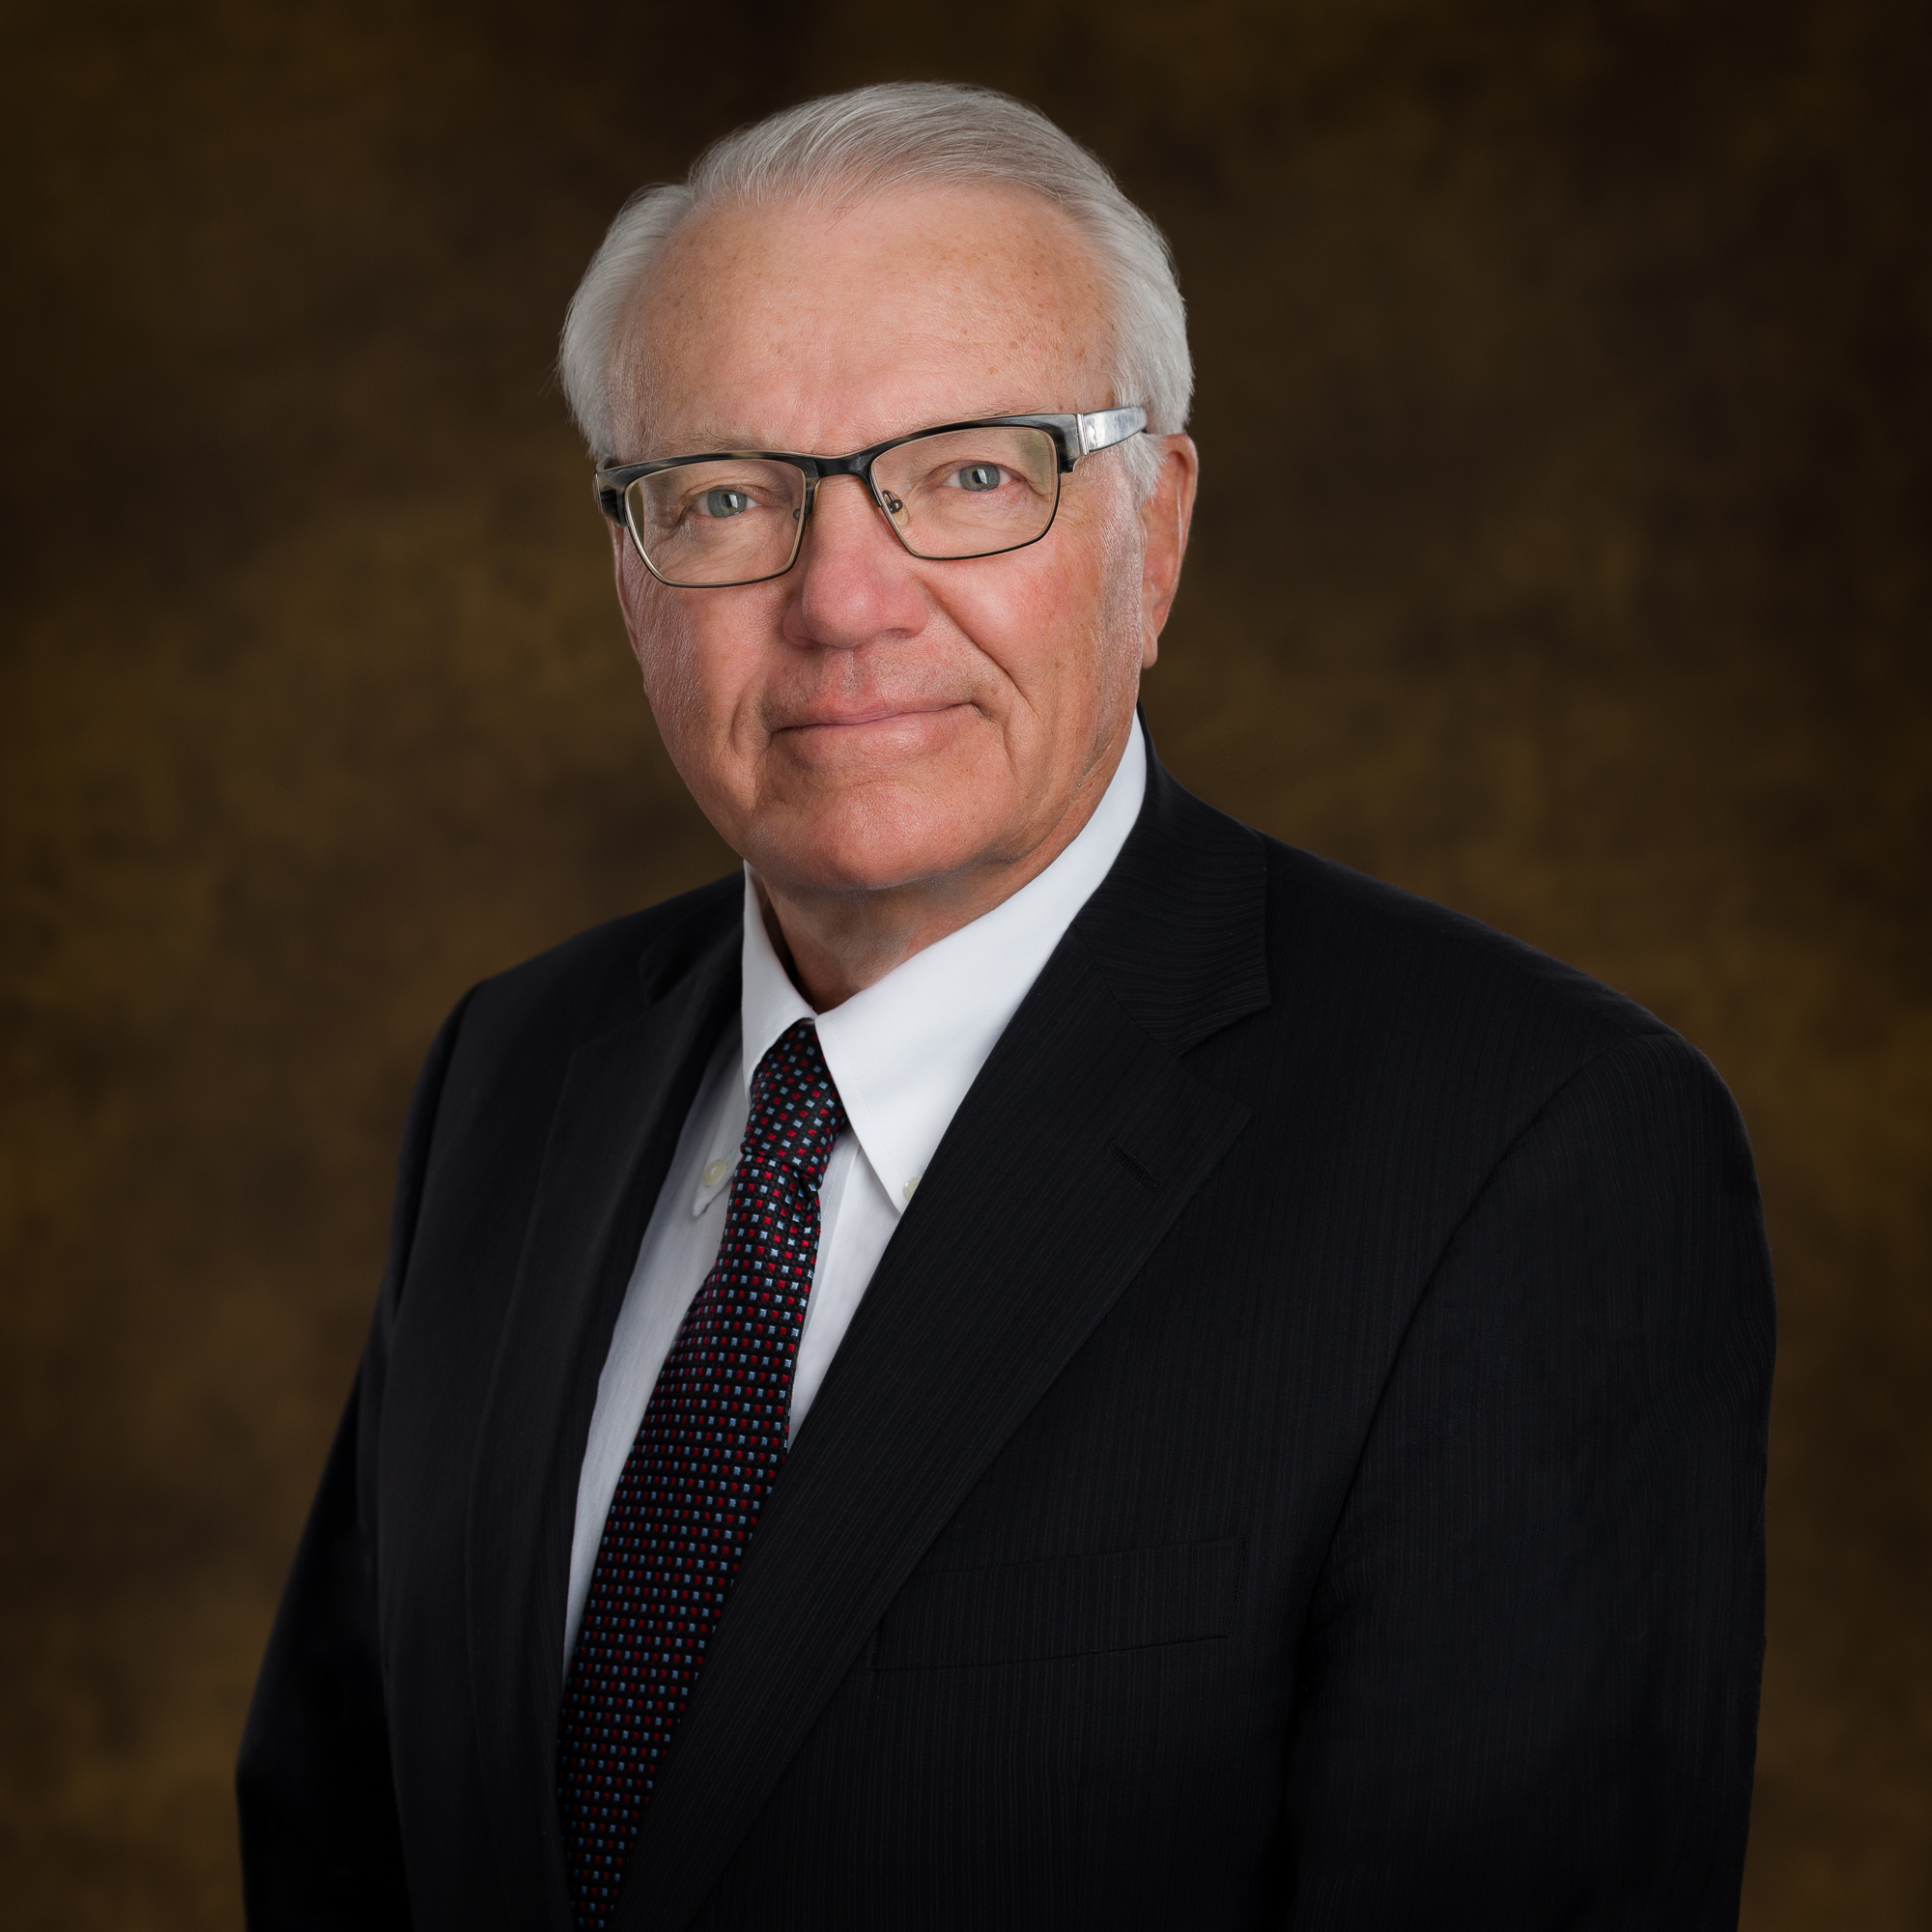 A profile photo of a middle aged man with silver hair and glasses wearing a business suit and tie.